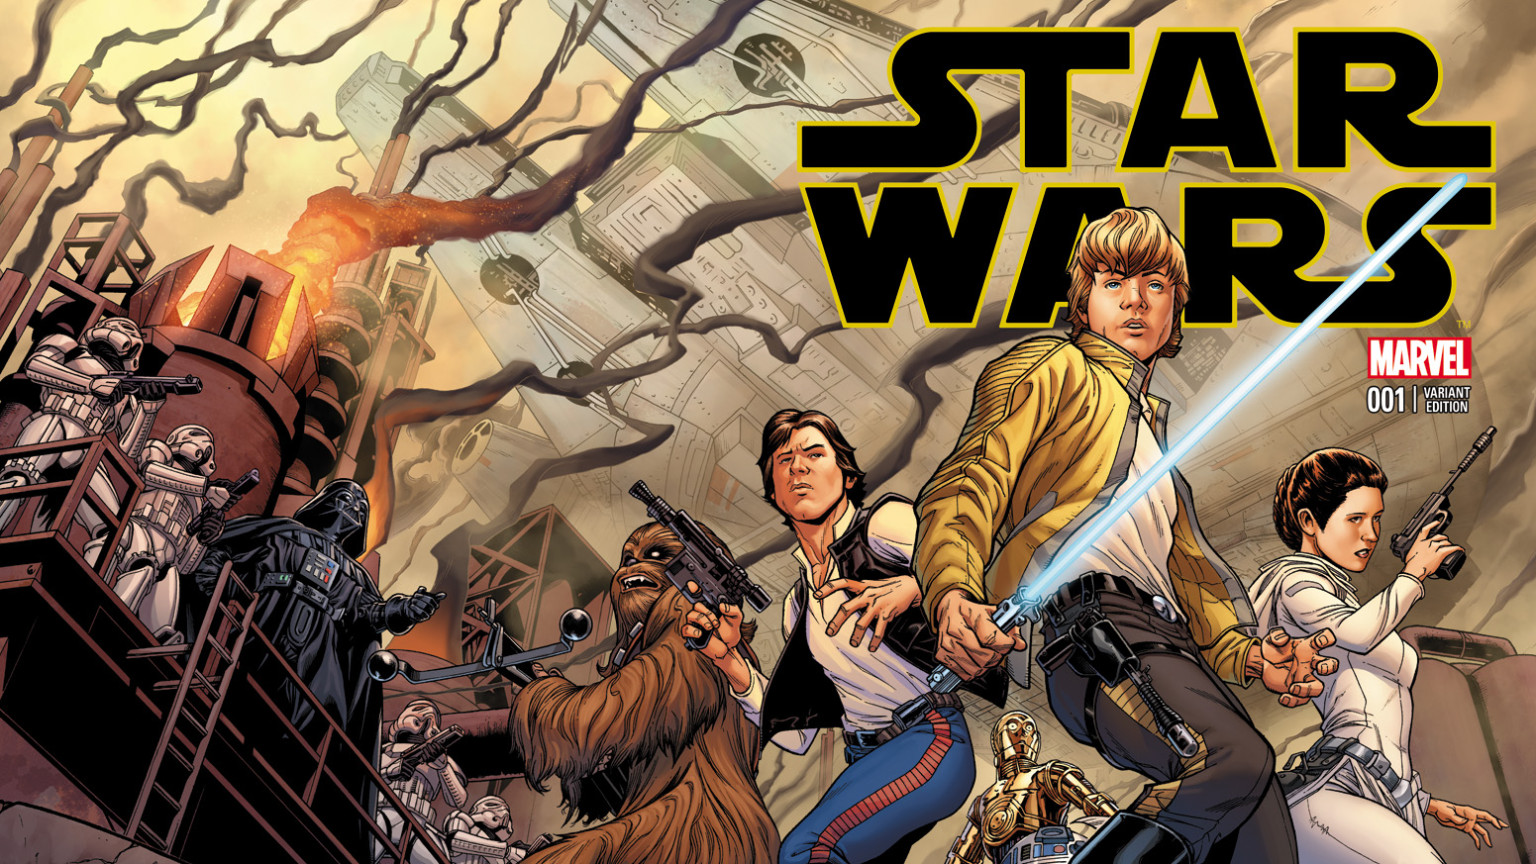 Star Wars The Force Awakens: These Are The Comics You're Looking For